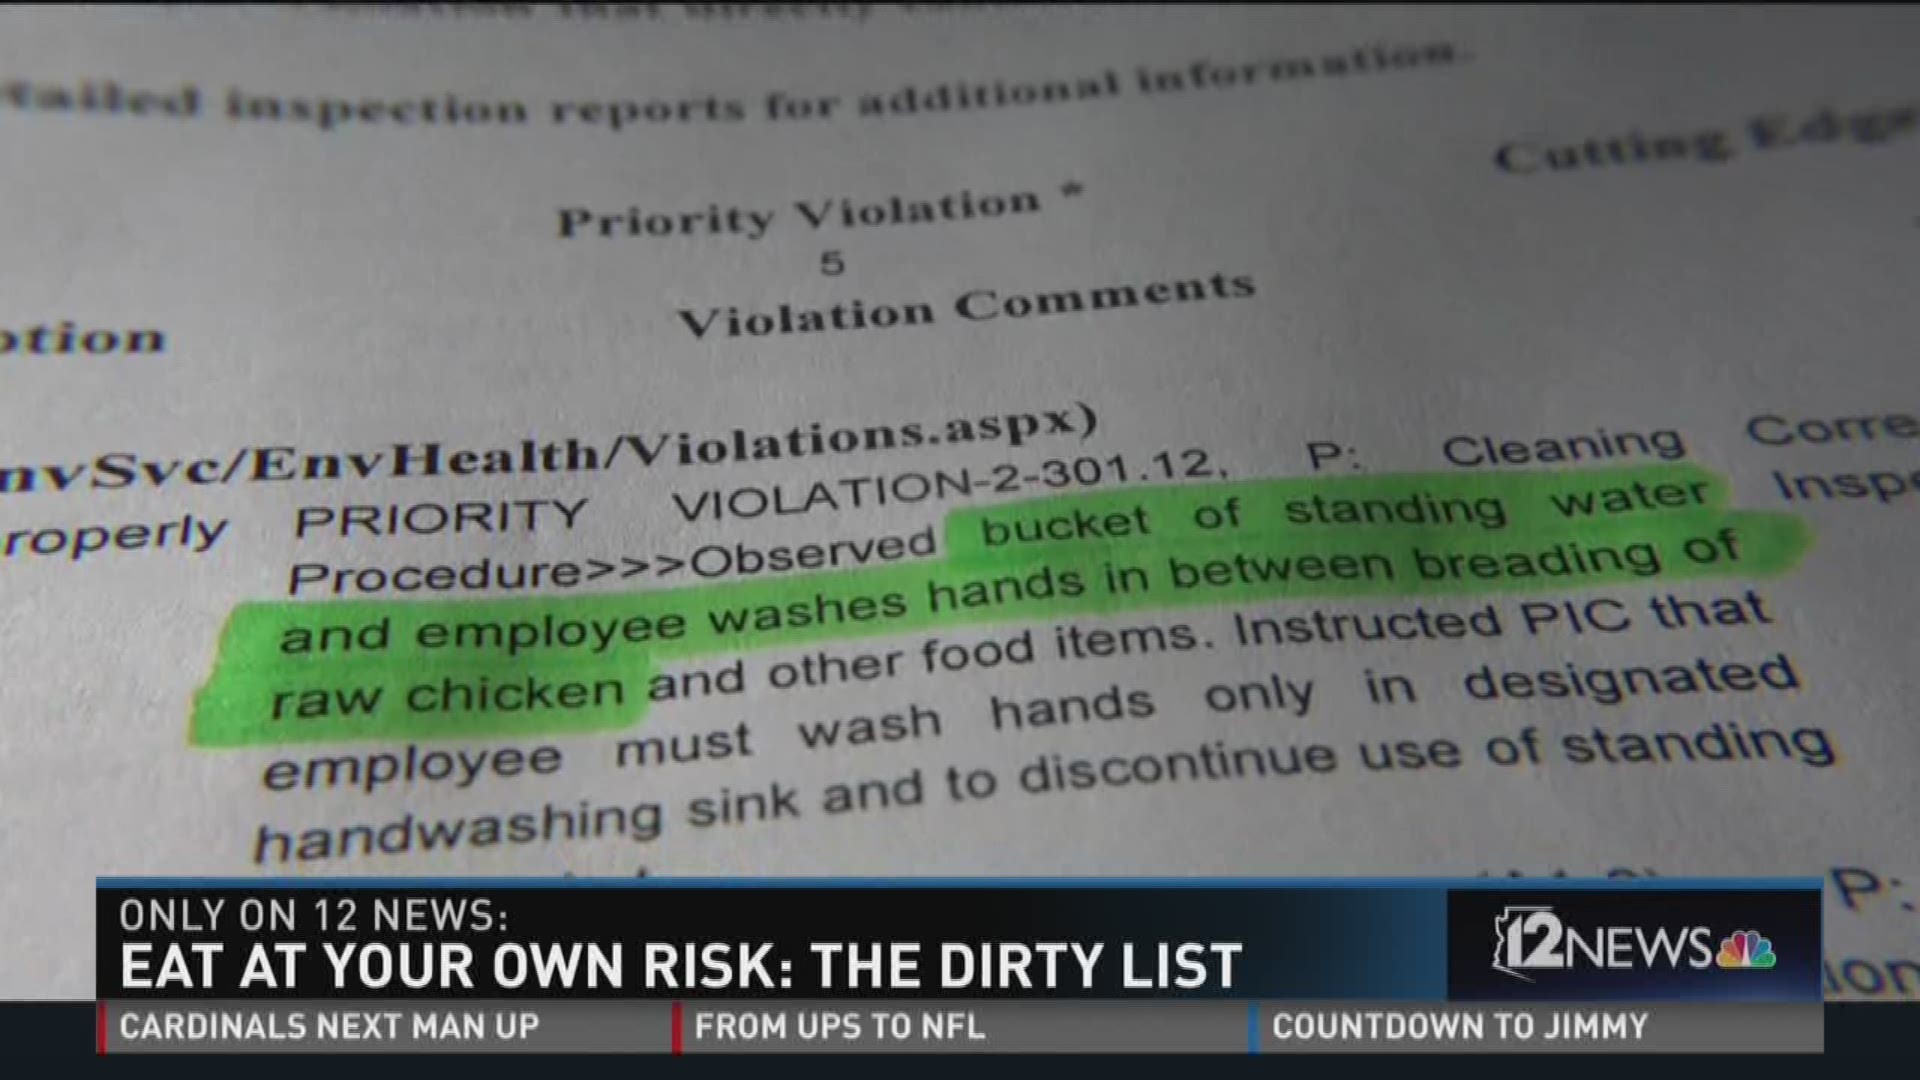 Eat at your own risk: The dirty list.